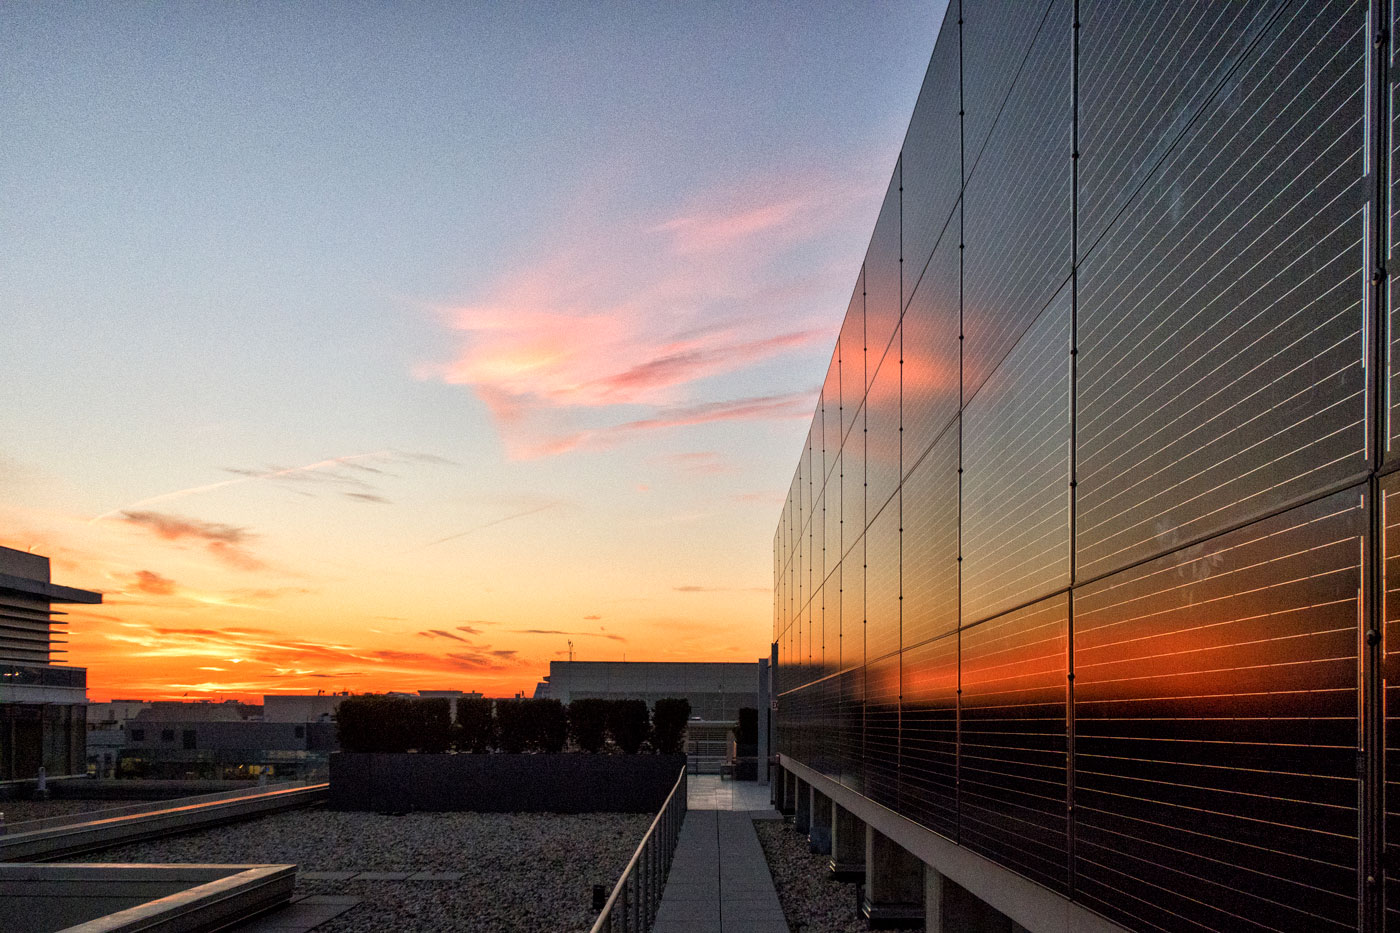 An outdoor sunset view of an upright vertical wall of solar panels on the right. There are streaks of clouds in the sky and the view overlooks buildings to the left.